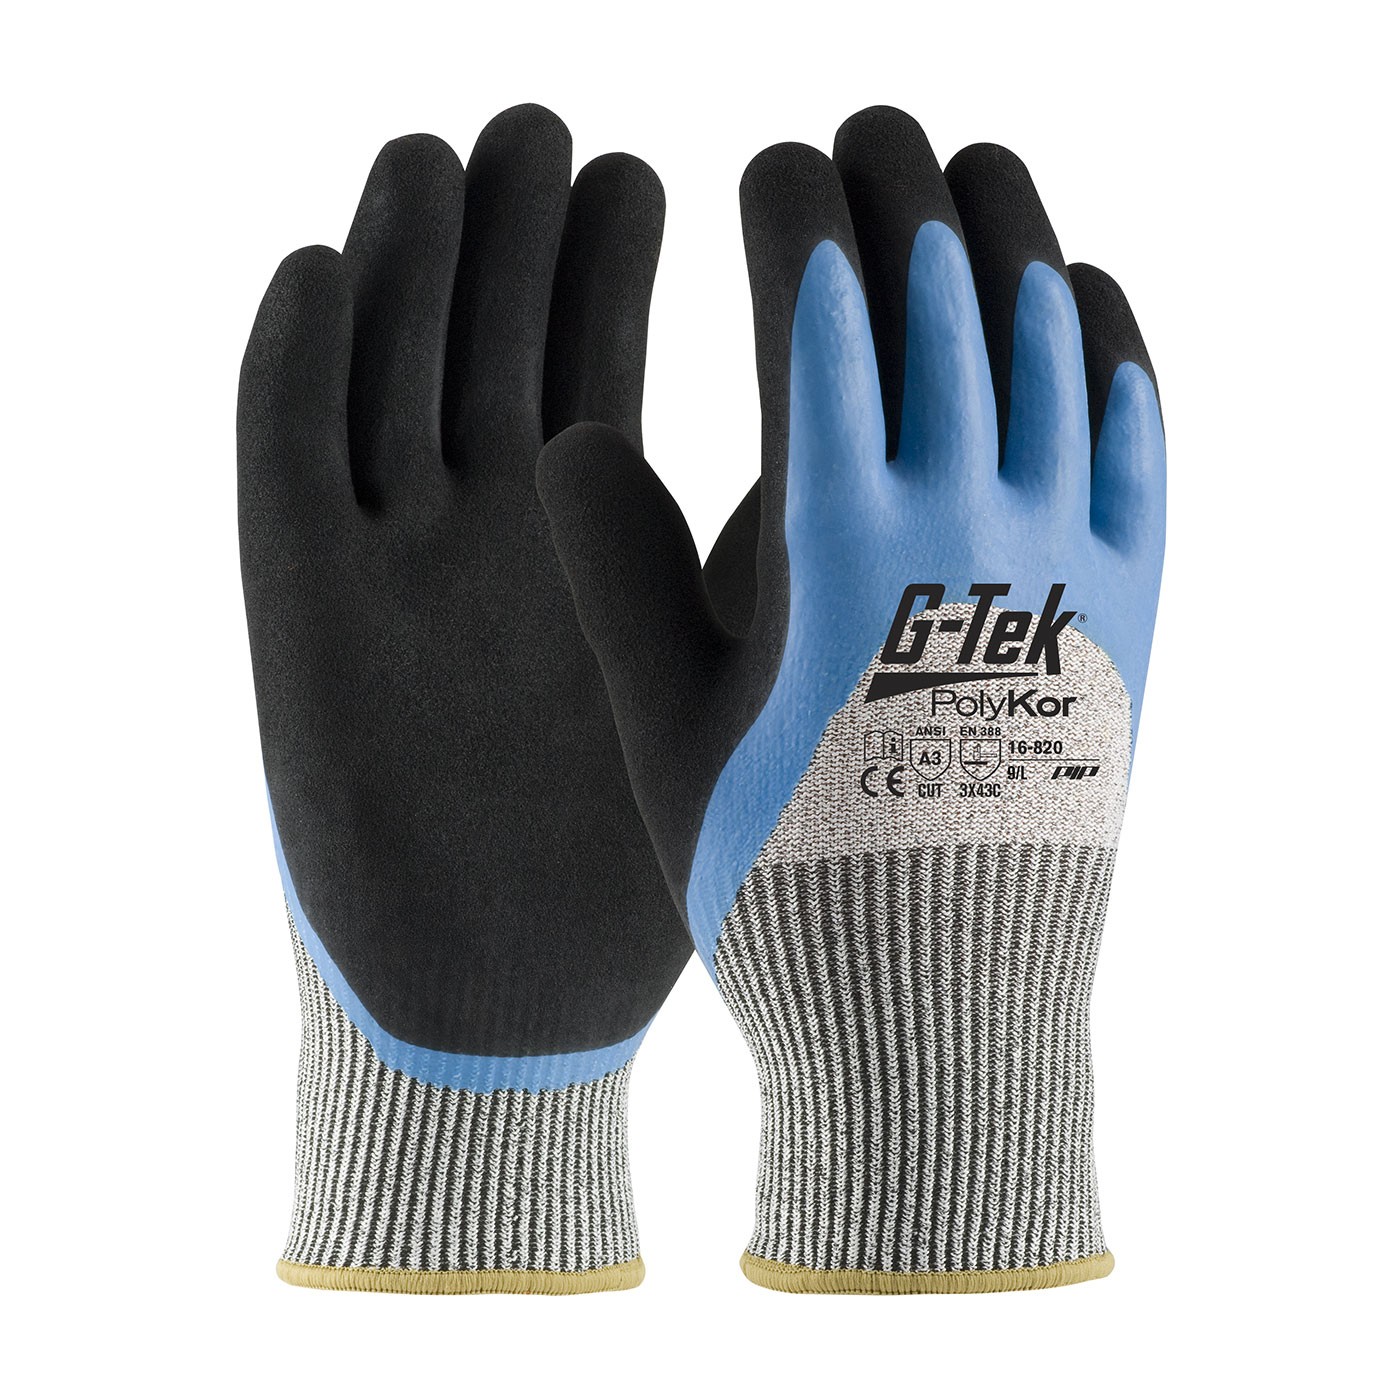 G-Tek® PolyKor® Seamless Knit PolyKor® Blended Glove with Acrylic Lining and Double-Dipped Latex Coated MicroSurface Grip on Palm, Fingers & Knuckles  (#16-820)